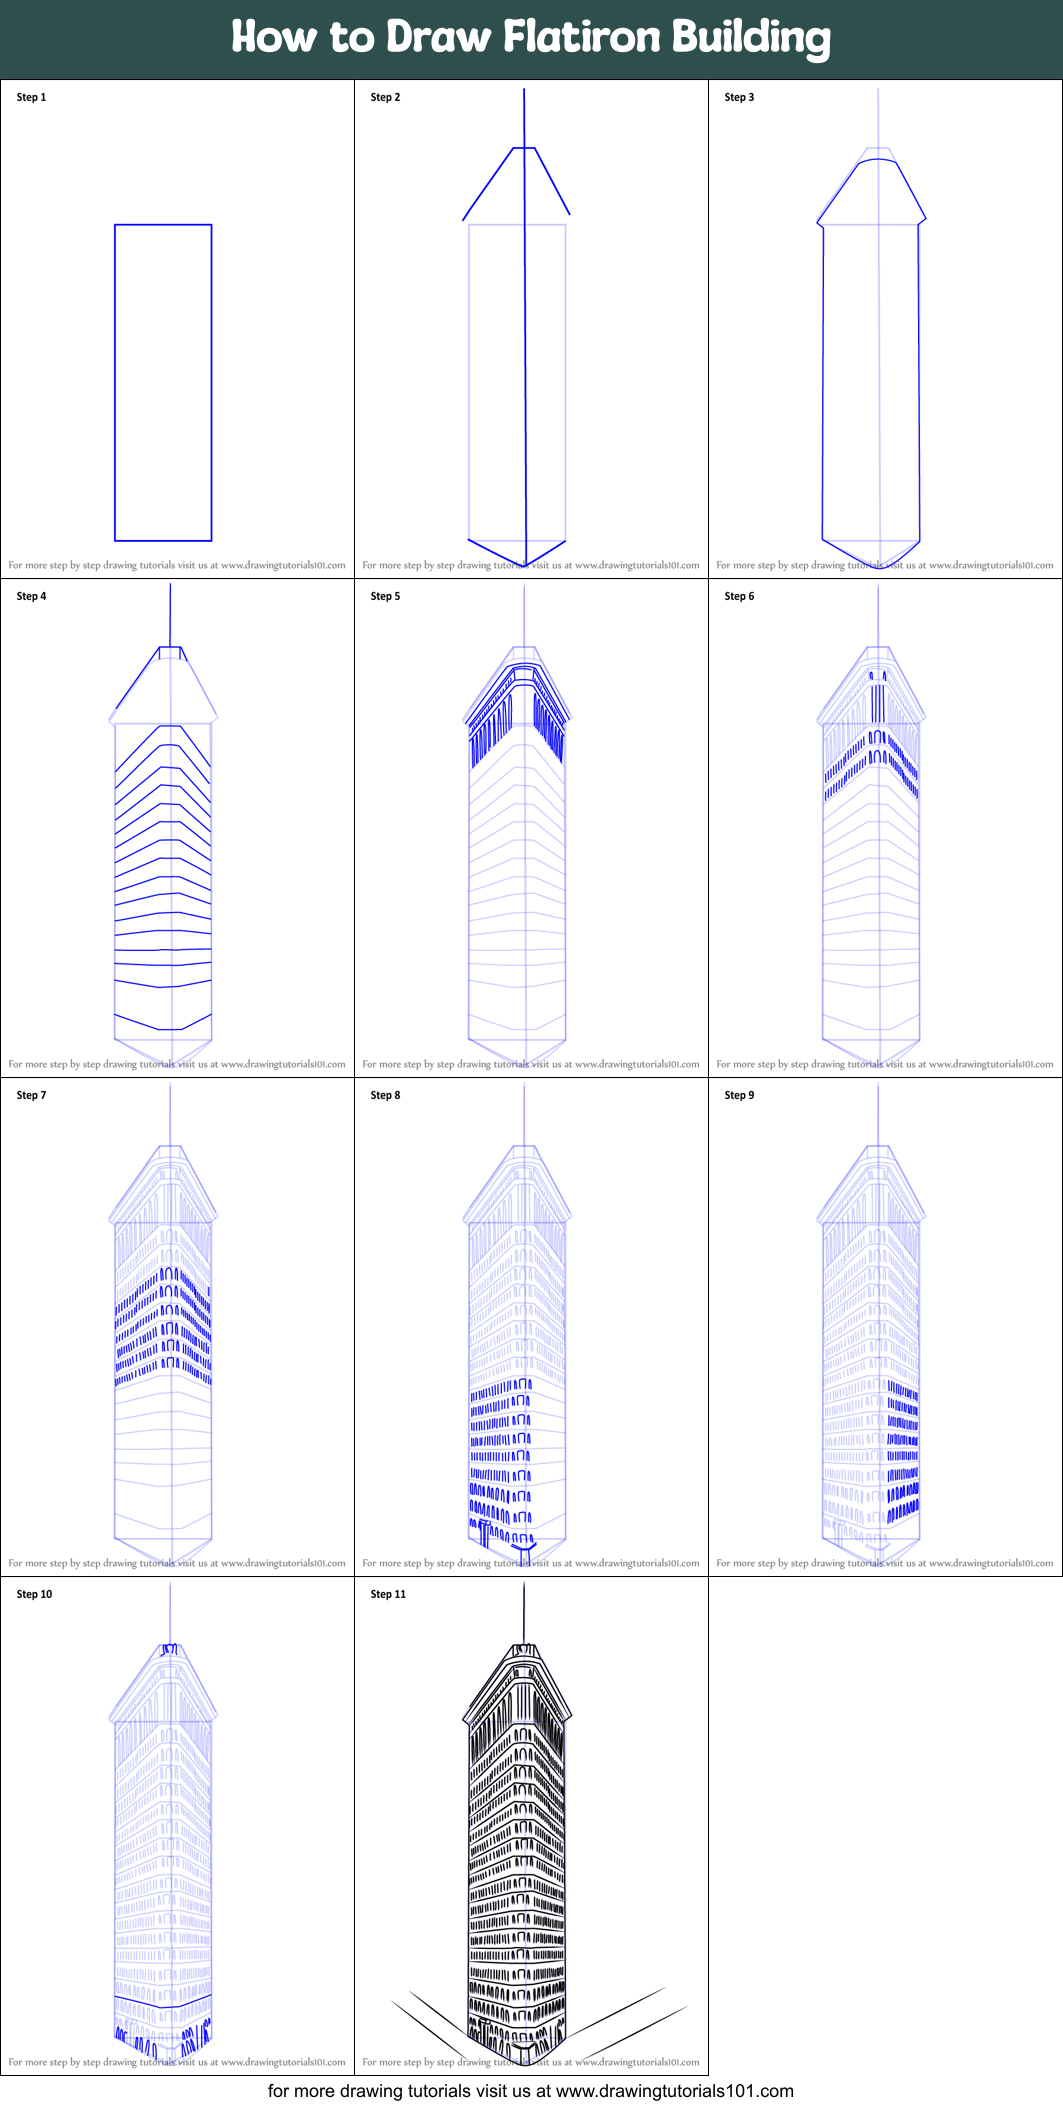 How To Draw Flatiron Building Printable Step By Step Drawing Sheet Drawingtutorials101 Com